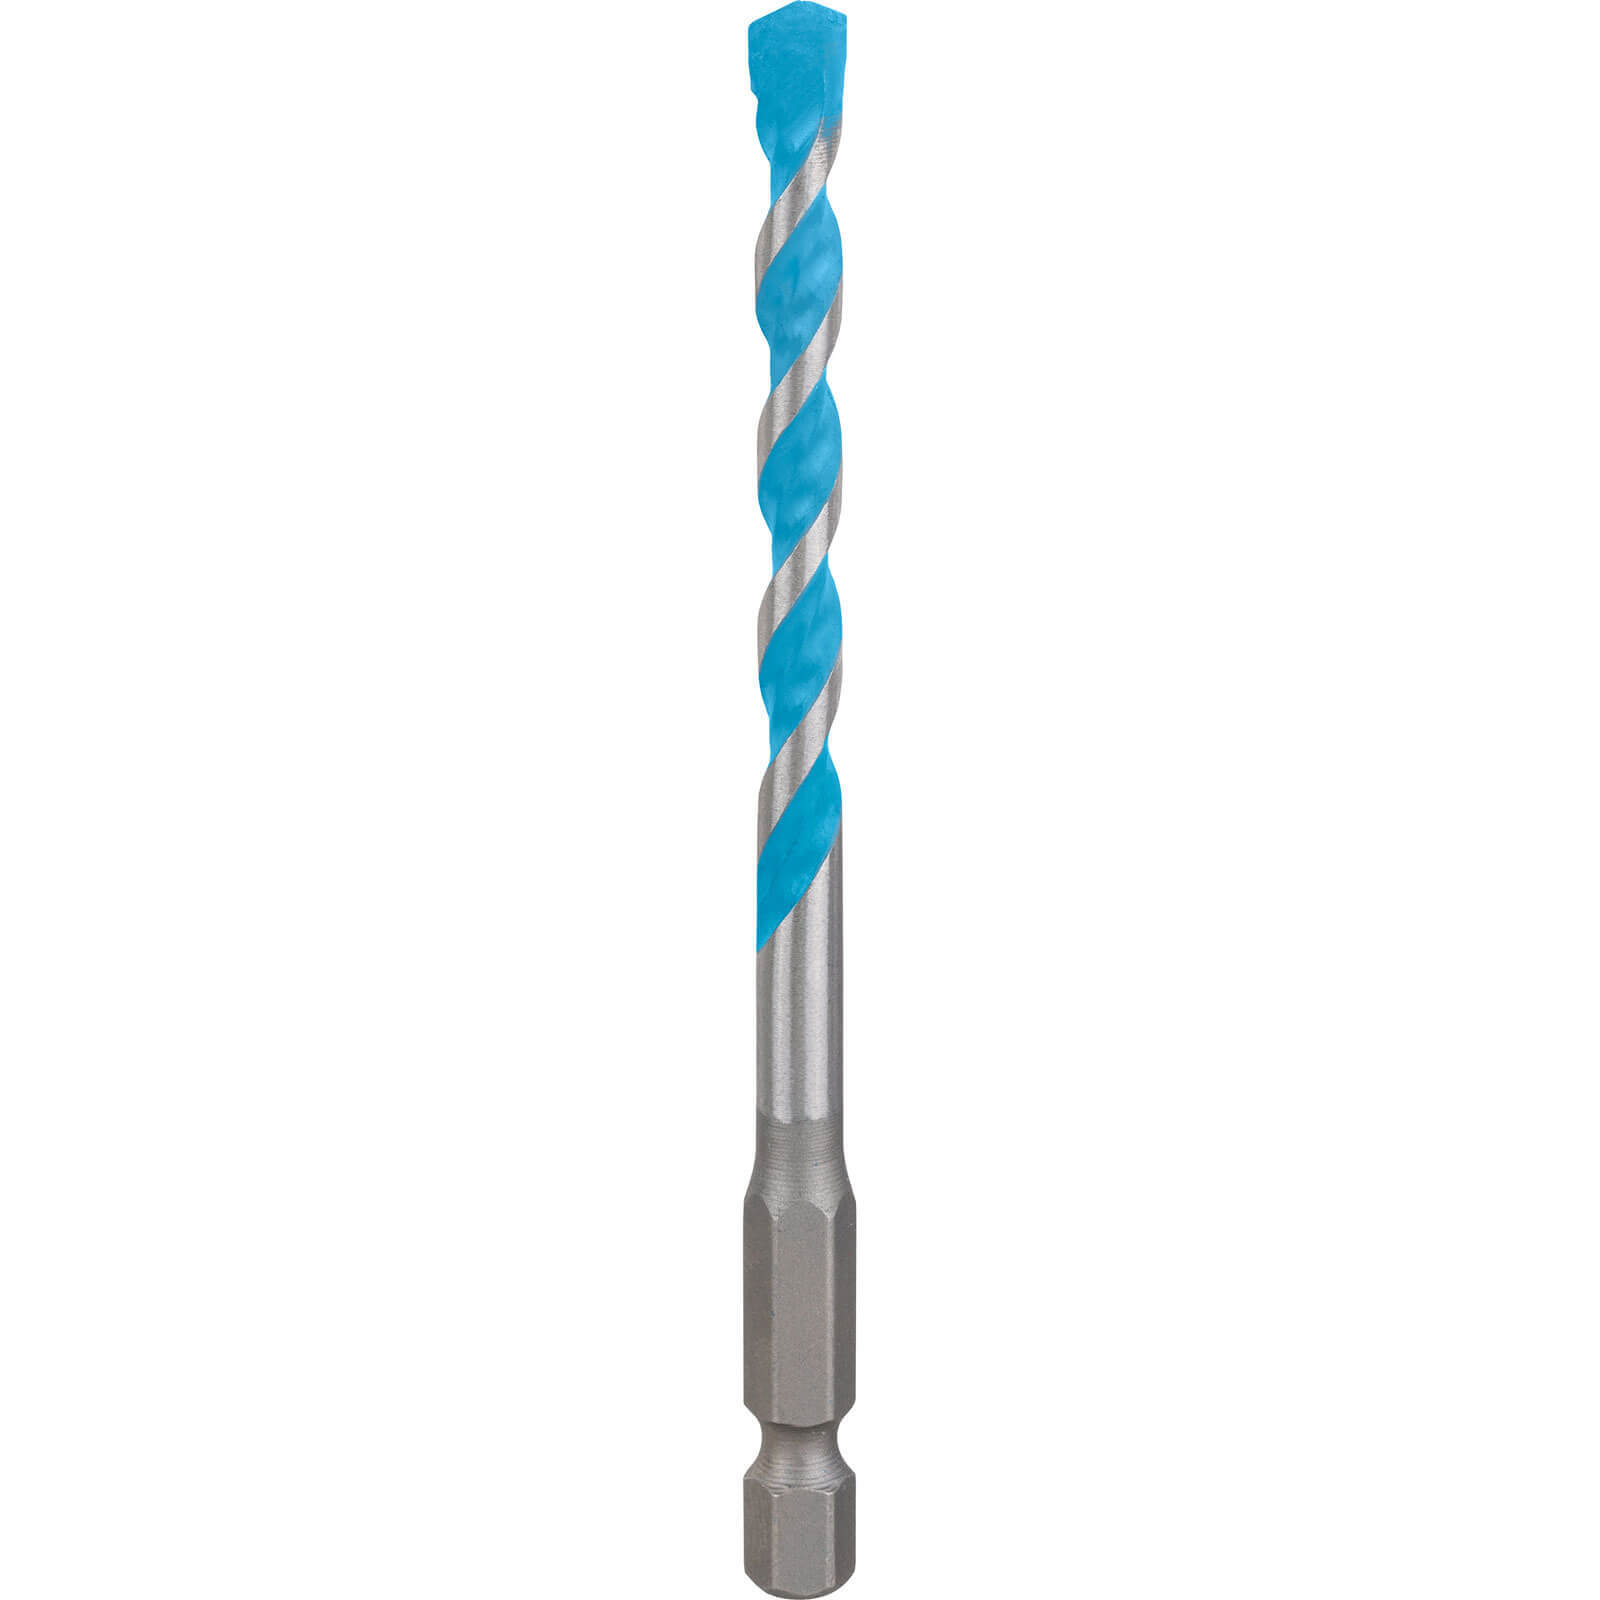 Image of Bosch Expert HEX-9 Multi Construction Drill Bit 5.5mm 150mm Pack of 1